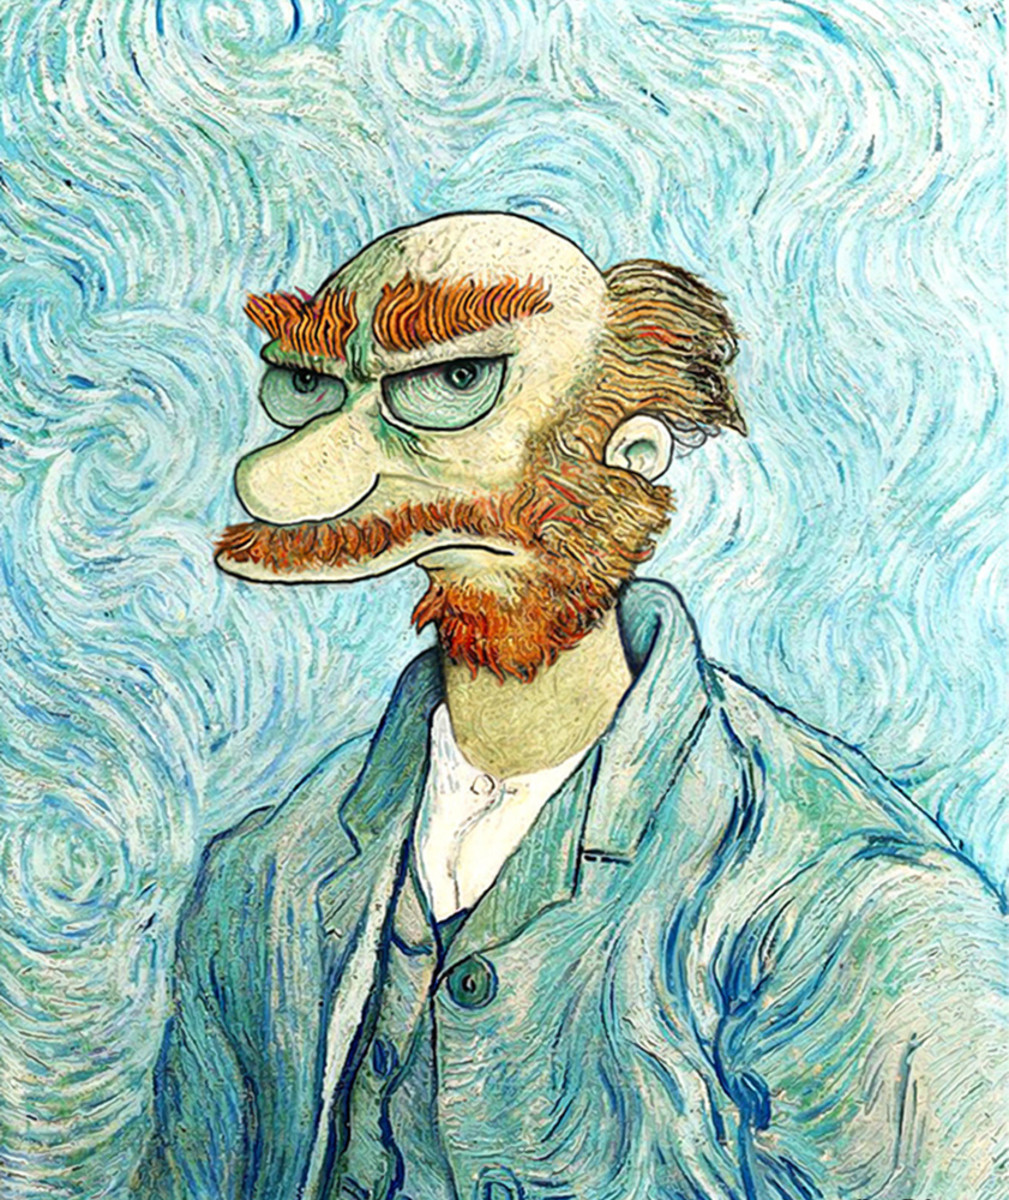 Groundskeeper Willie from the Simpsons as Van Gogh painted by David Barton